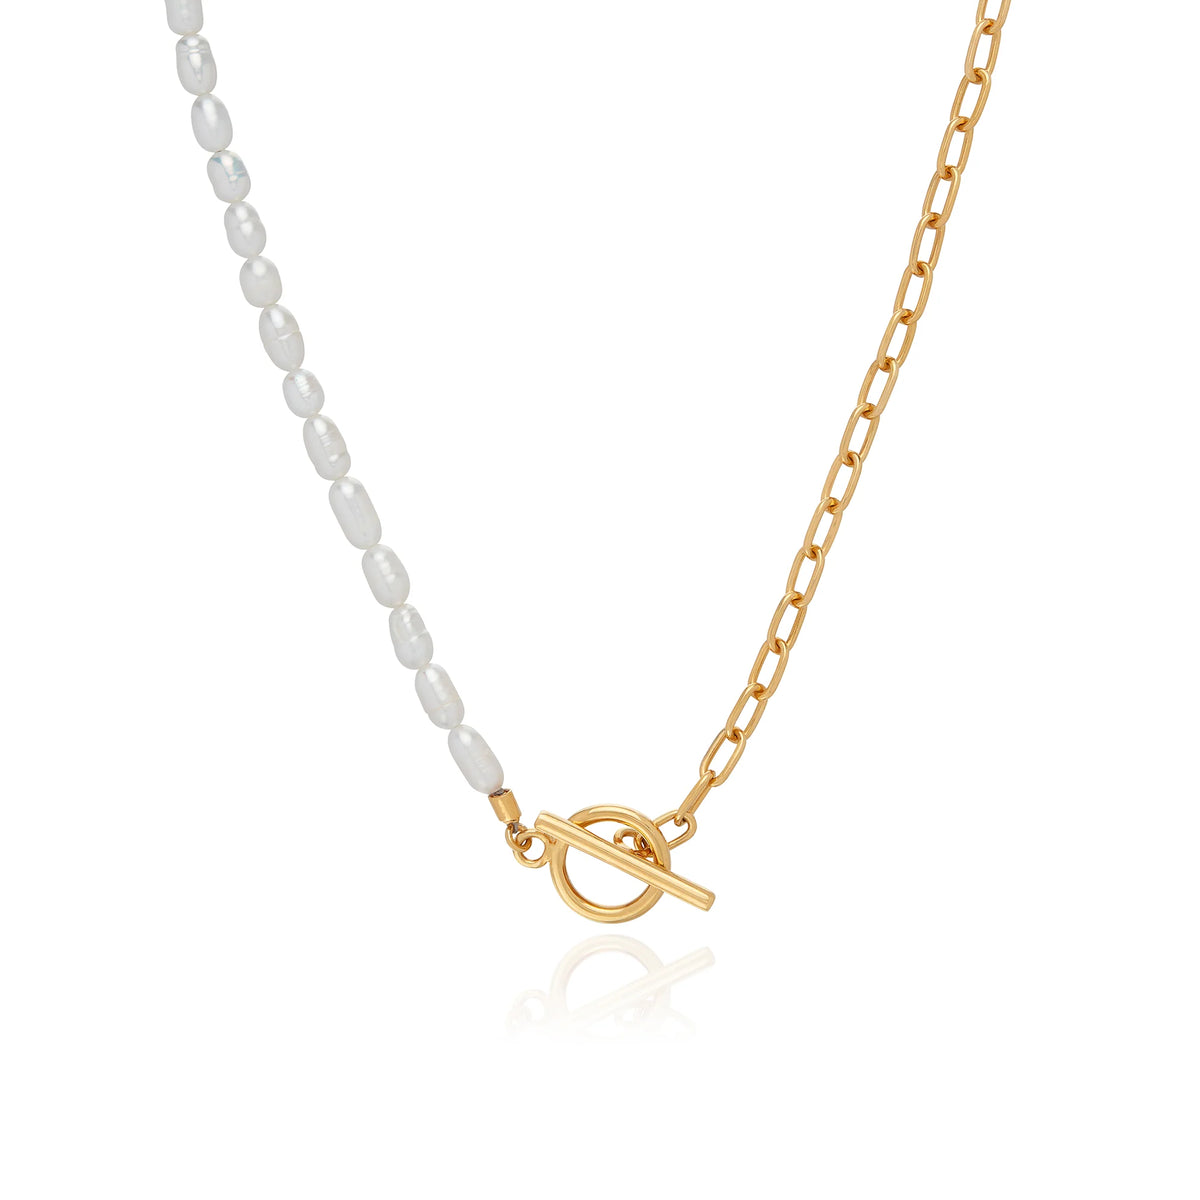 Half pearl beads and half gold link chain necklace with gold plated toggle fastening